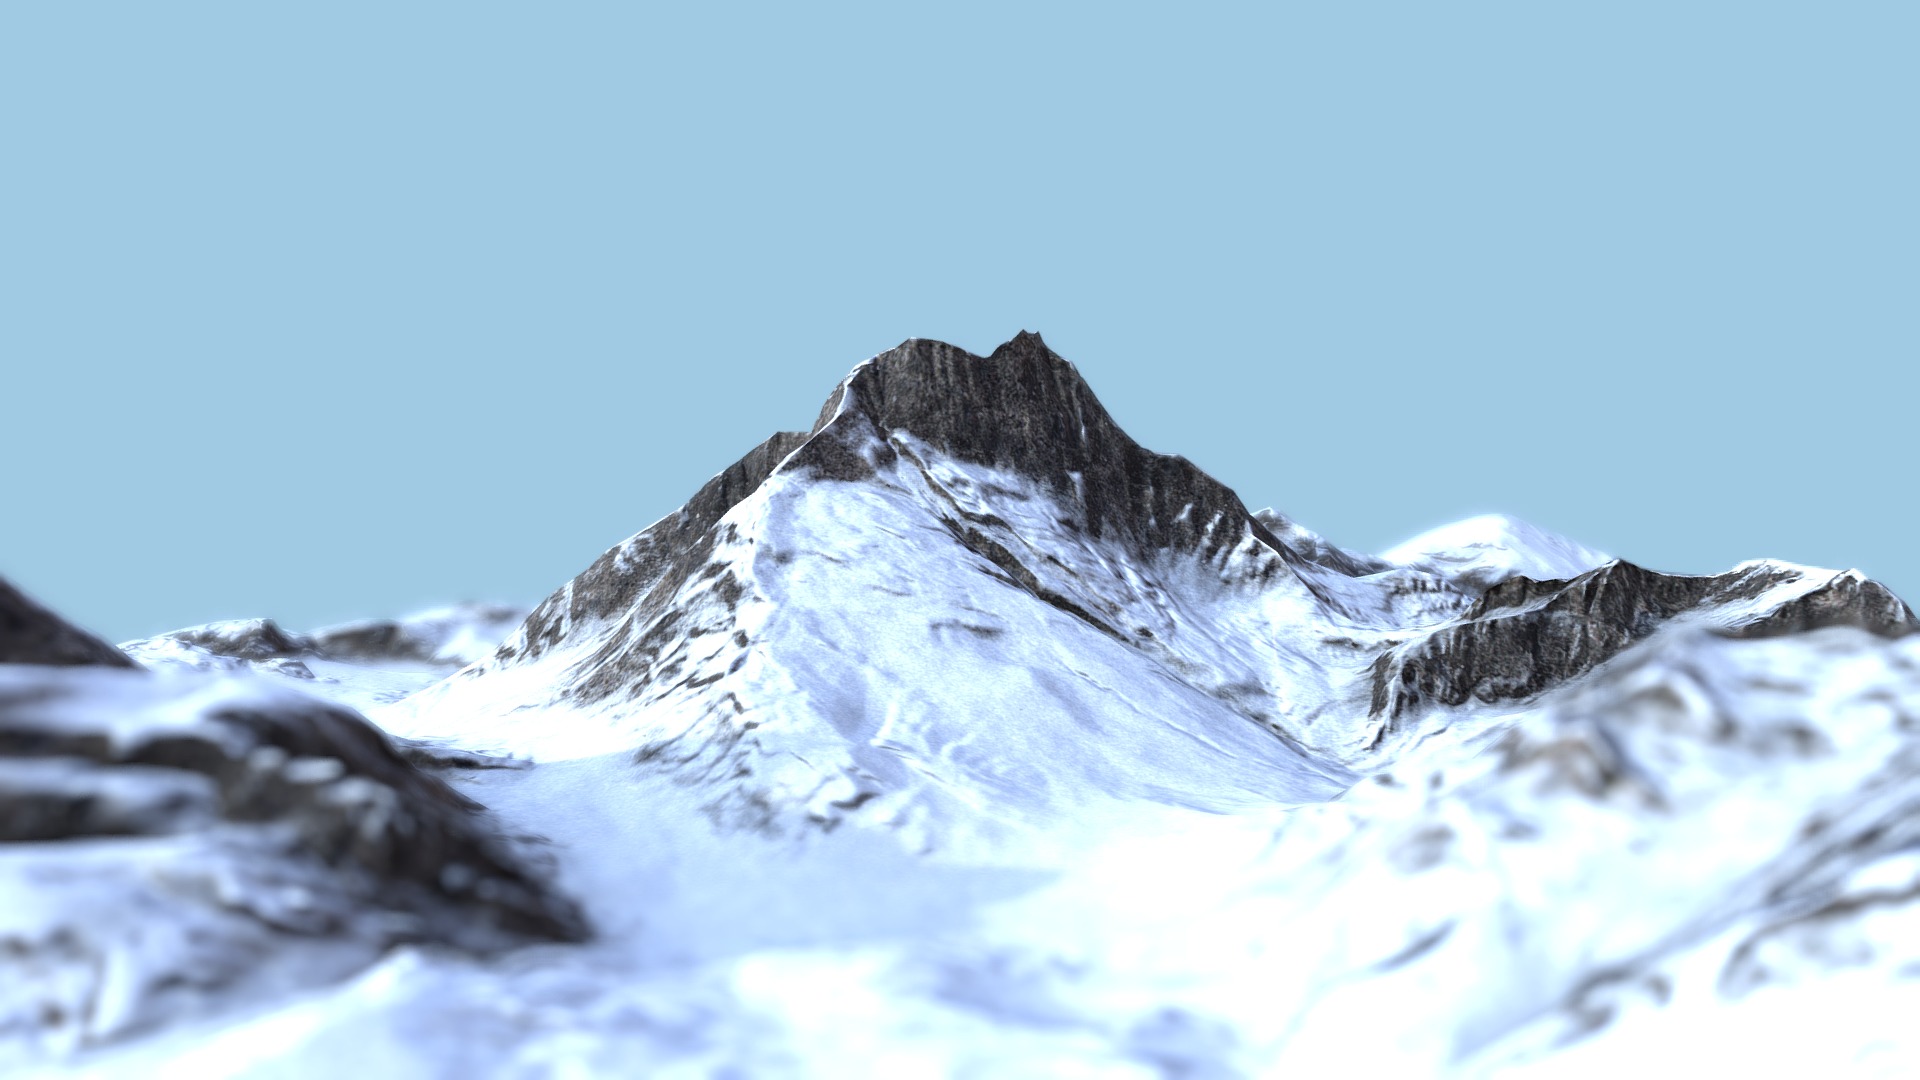 3D model Snow Mountain - This is a 3D model of the Snow Mountain. The 3D model is about a snowy mountain with a blue sky.